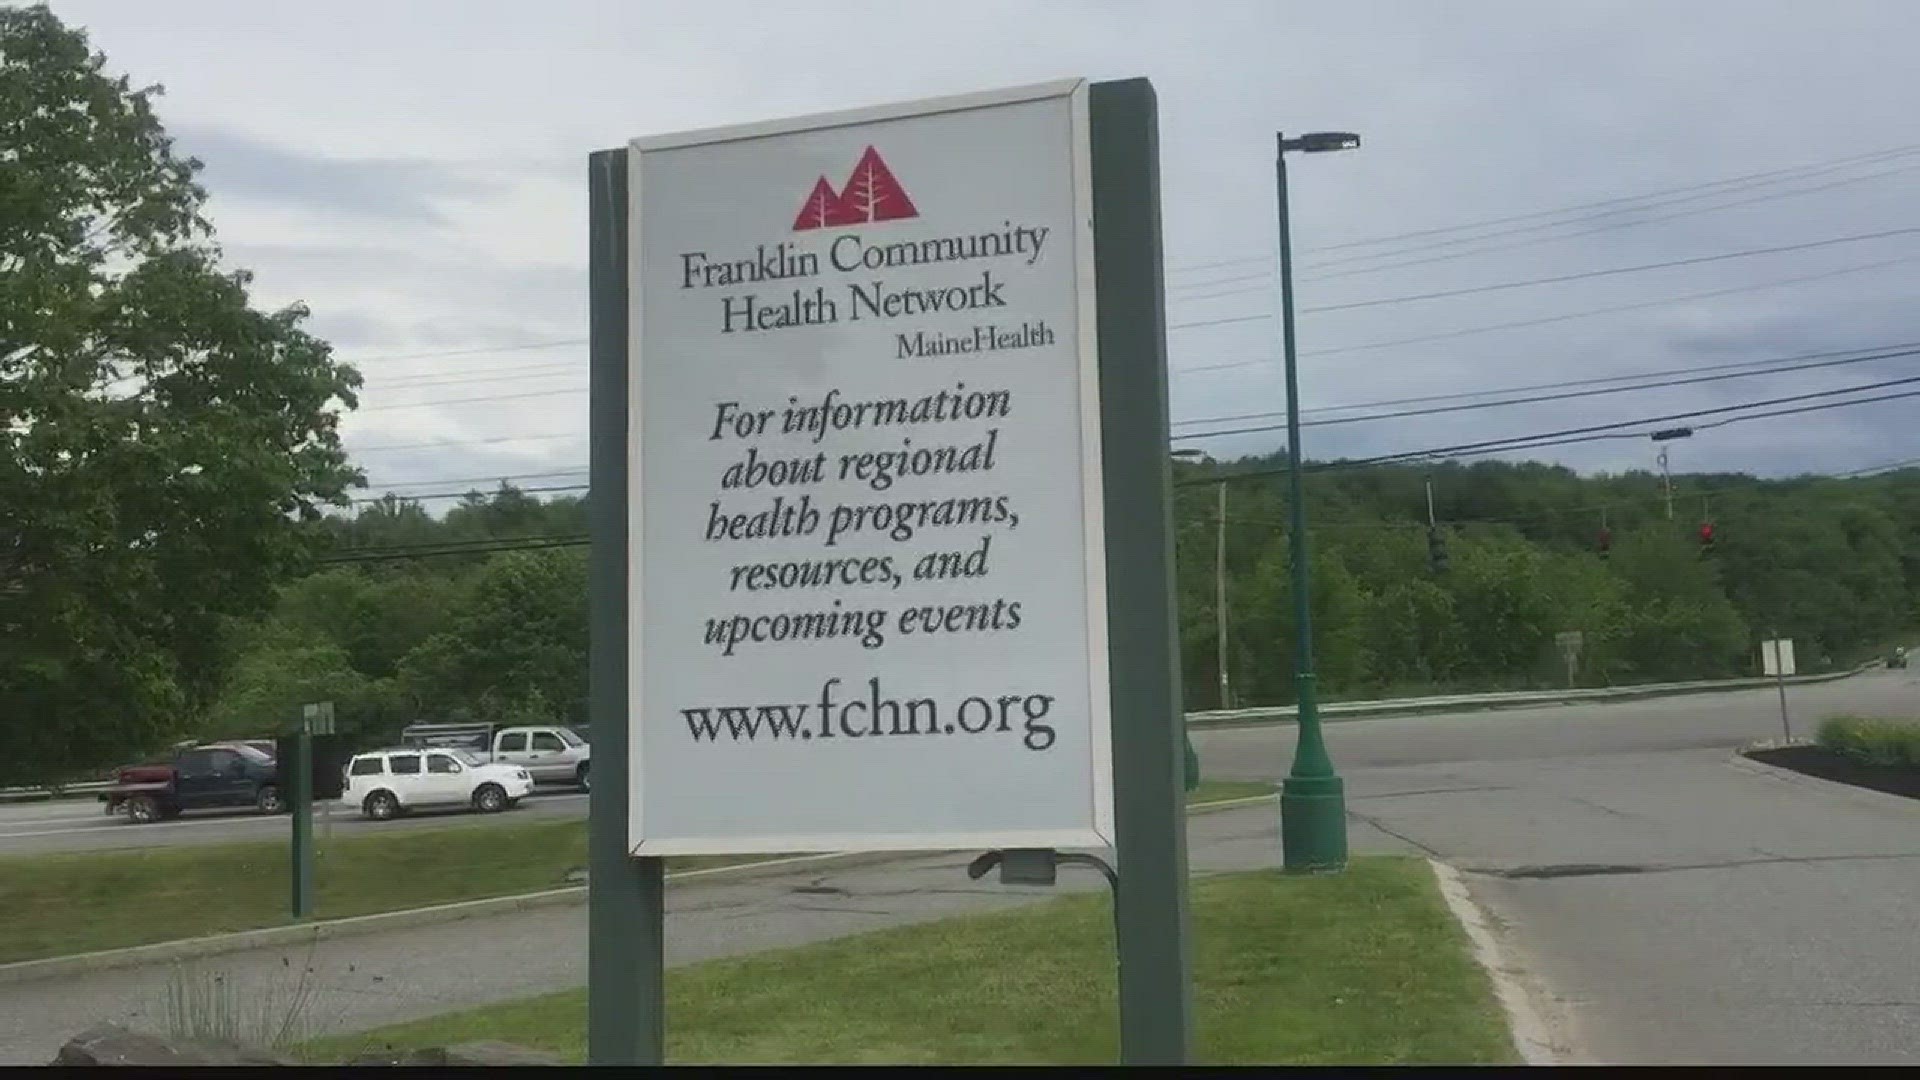 The Center for Disease control confirmed the first case of measles in Maine since 1997.